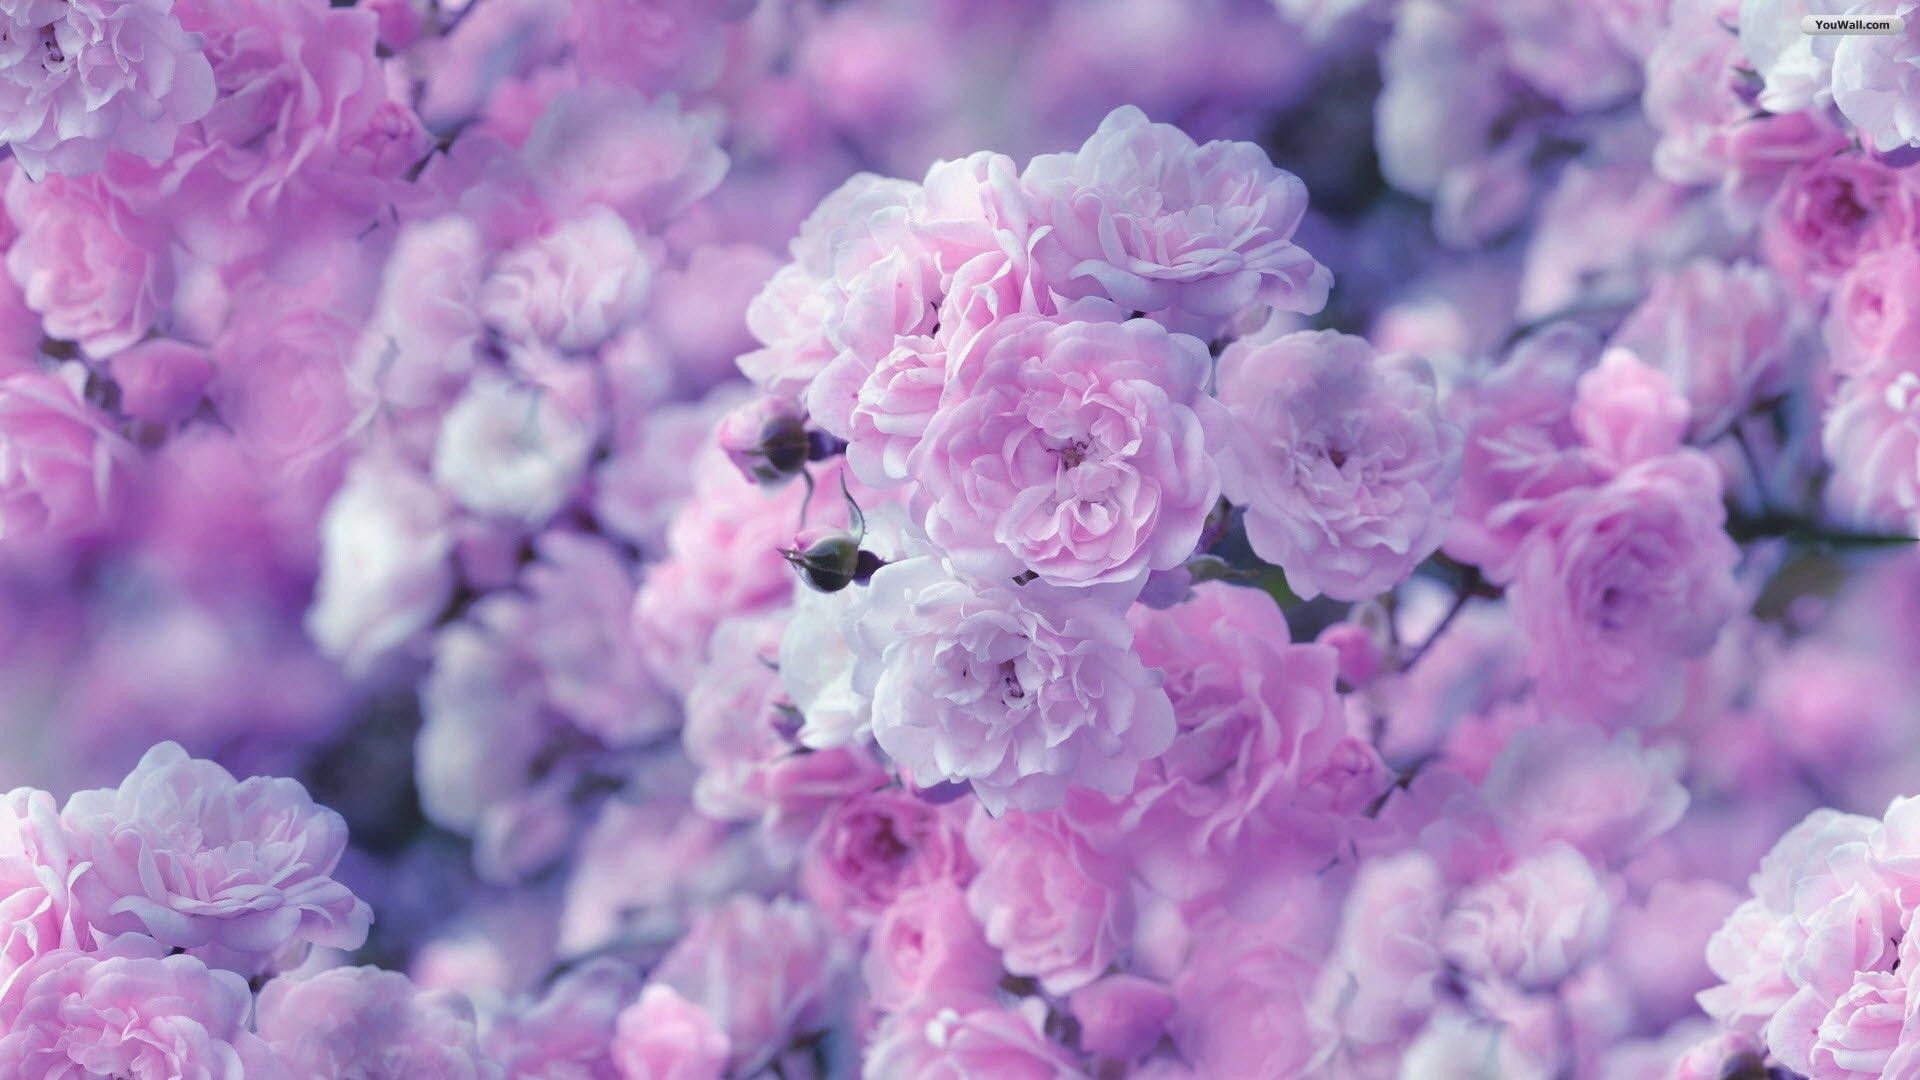 1920x1080 8. pictures-of-pretty-flowers8-600x338